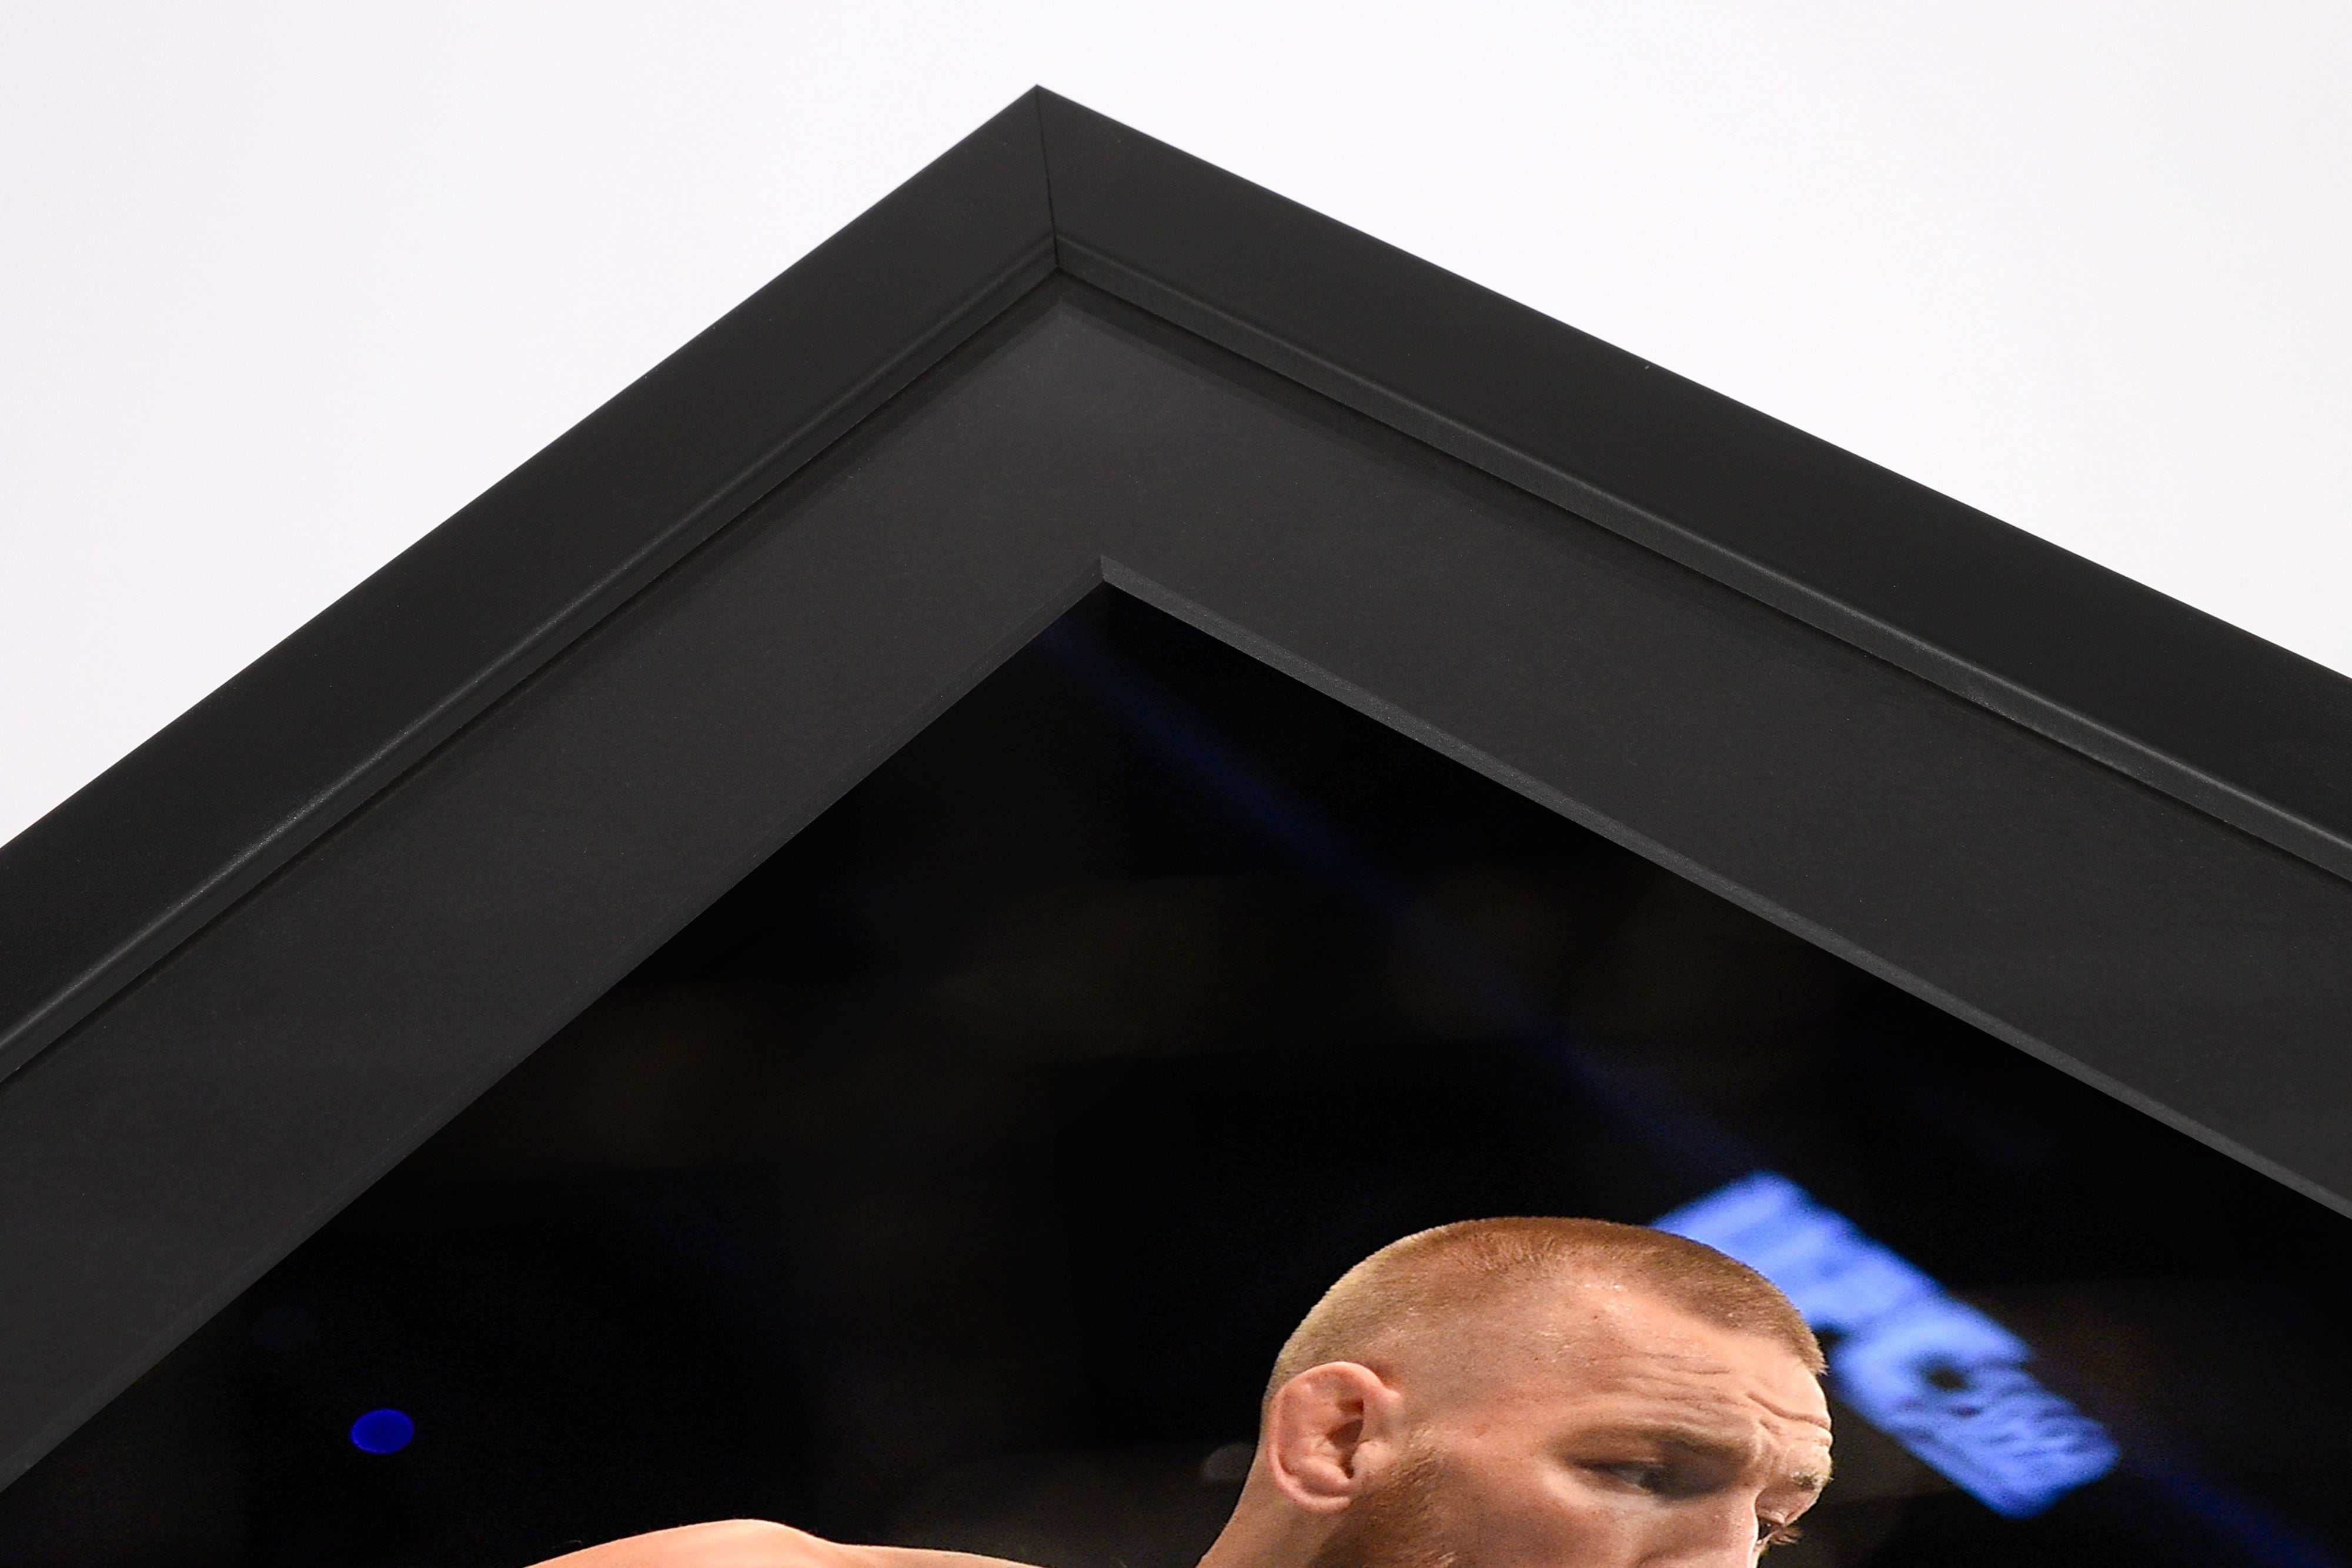 Panoramic Collage Signed Framed Wings by Conor Mcgregor